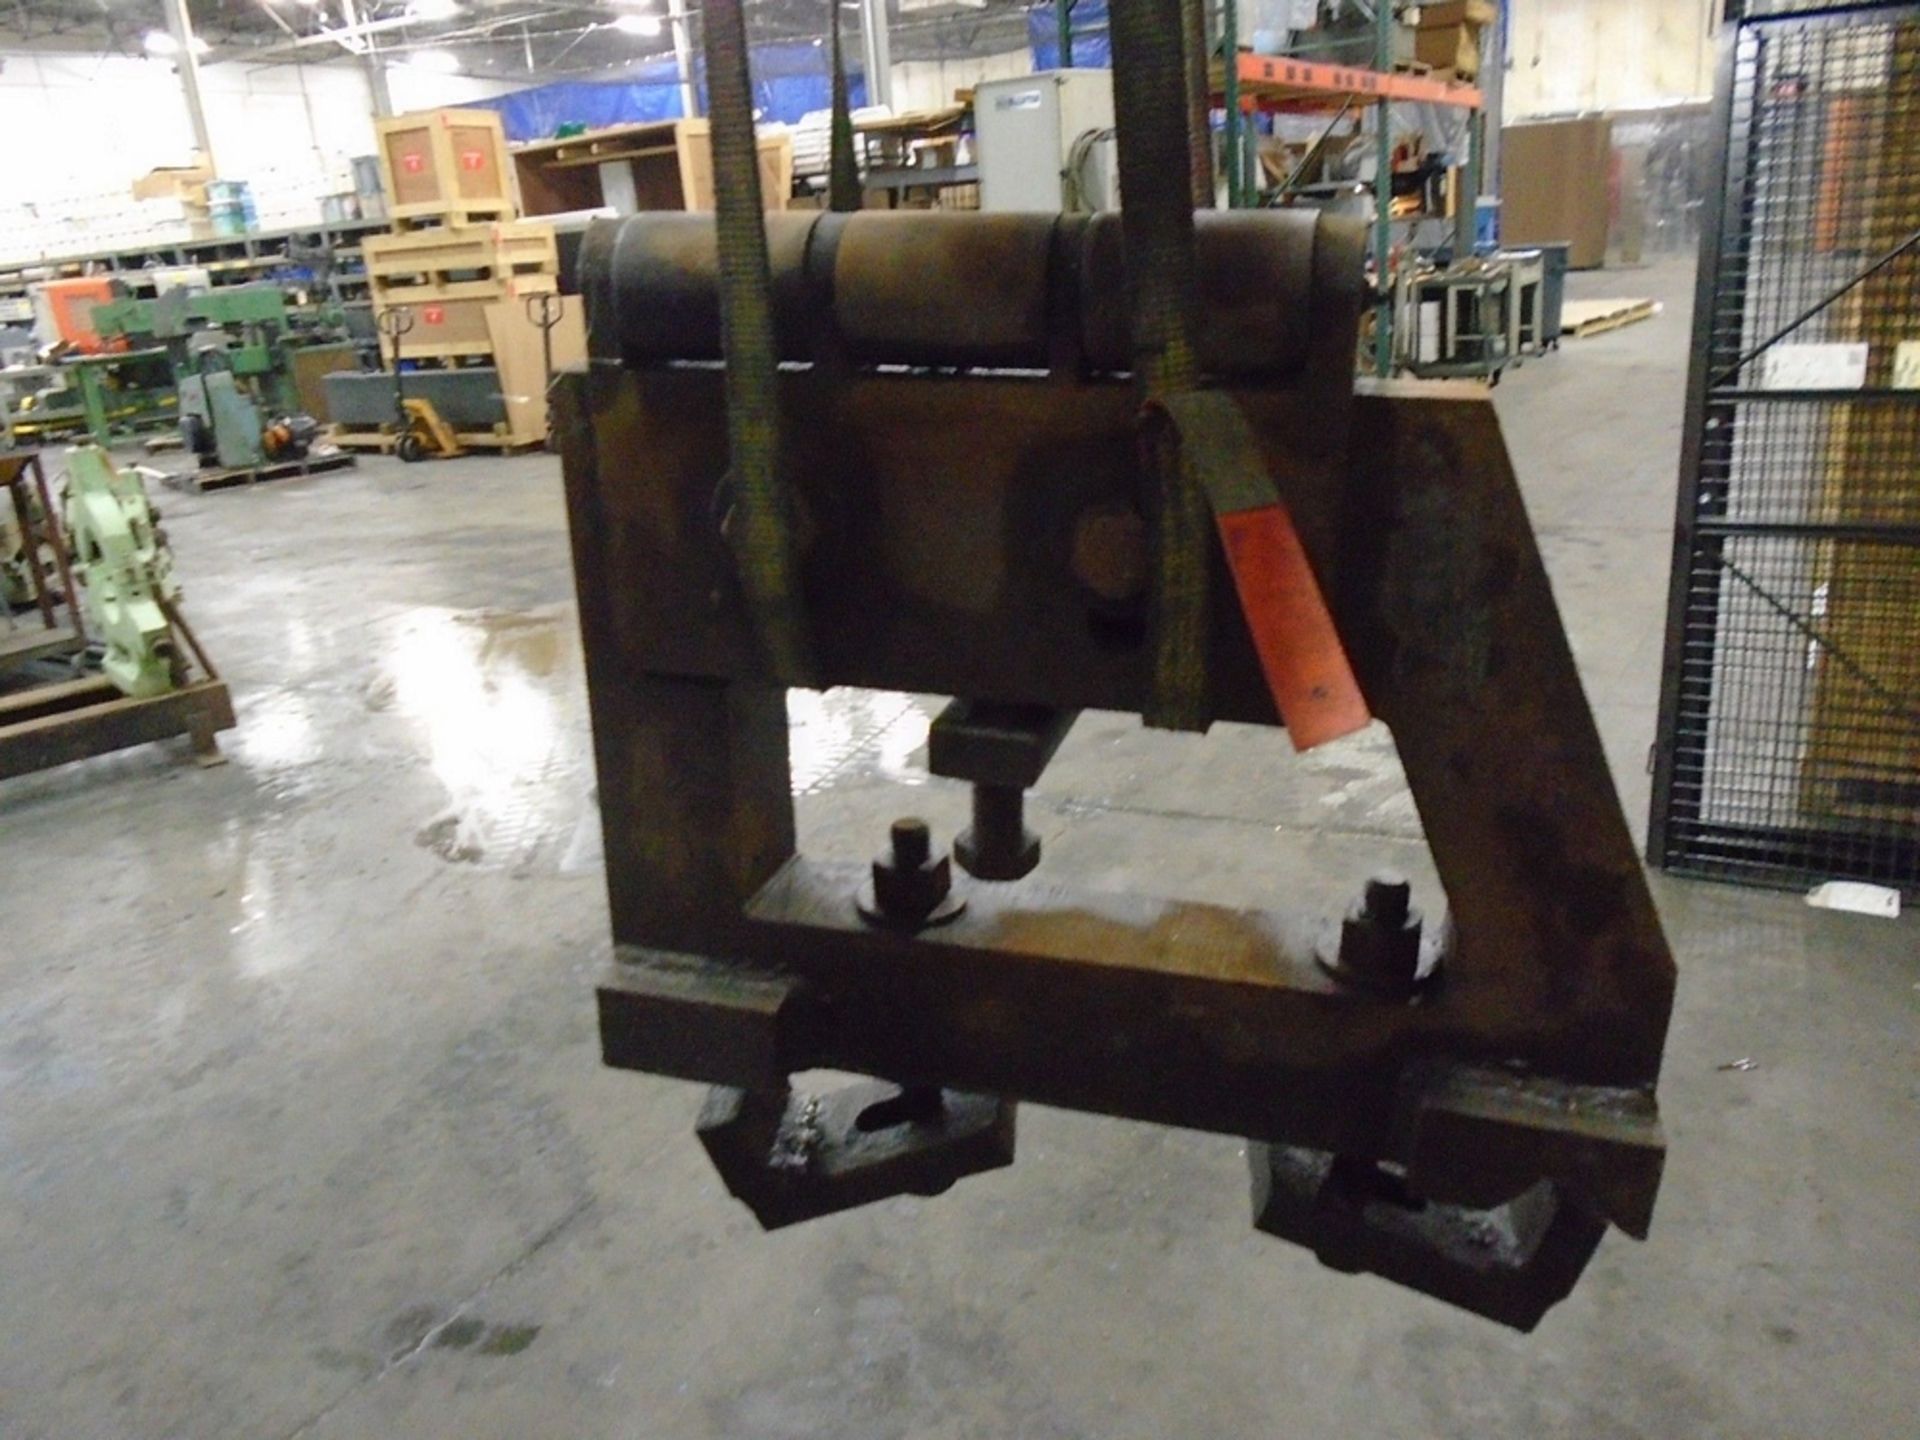 Roll Support for Large swing Engine Lathe See Draw for Dimensions We can provide loading for this - Image 2 of 3